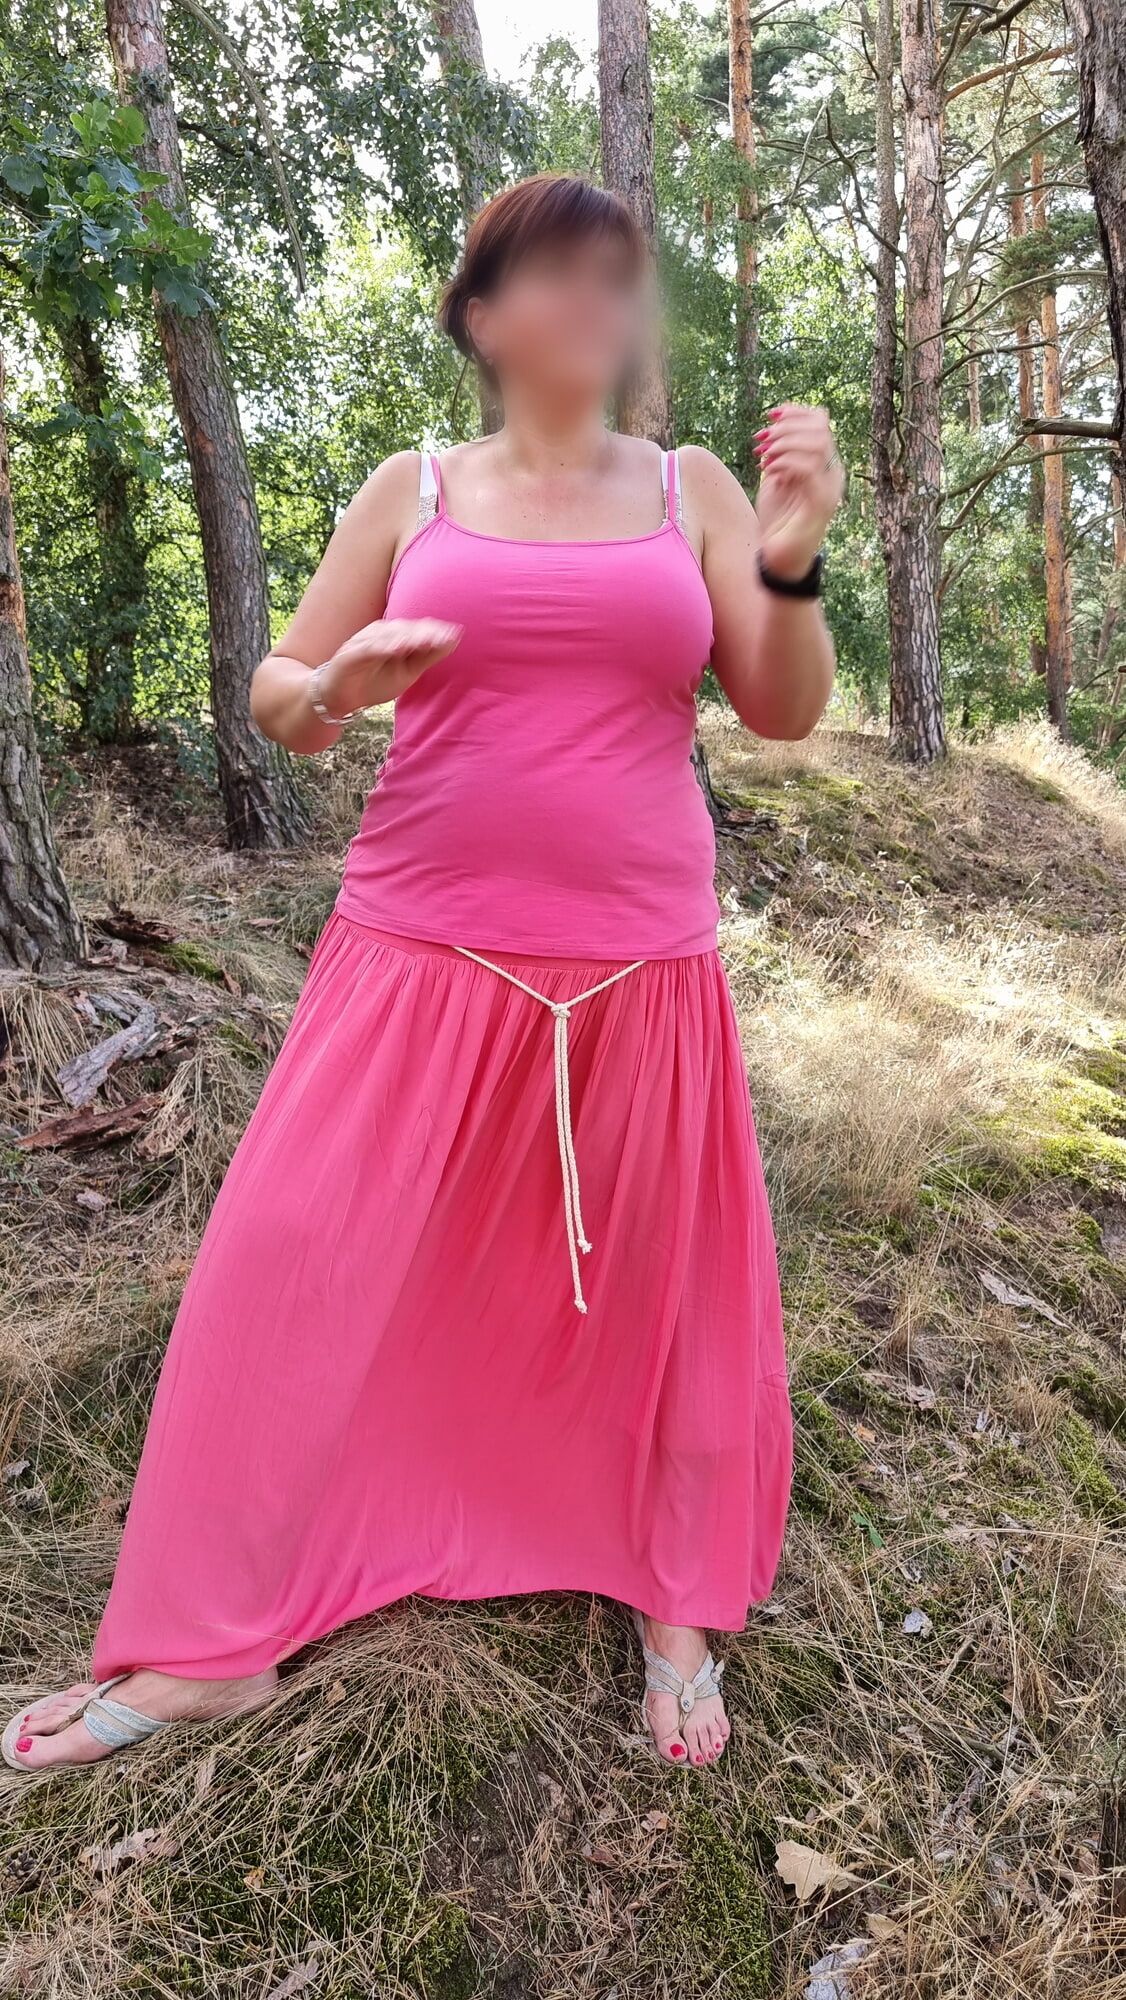 busty milf showing off in nature #2